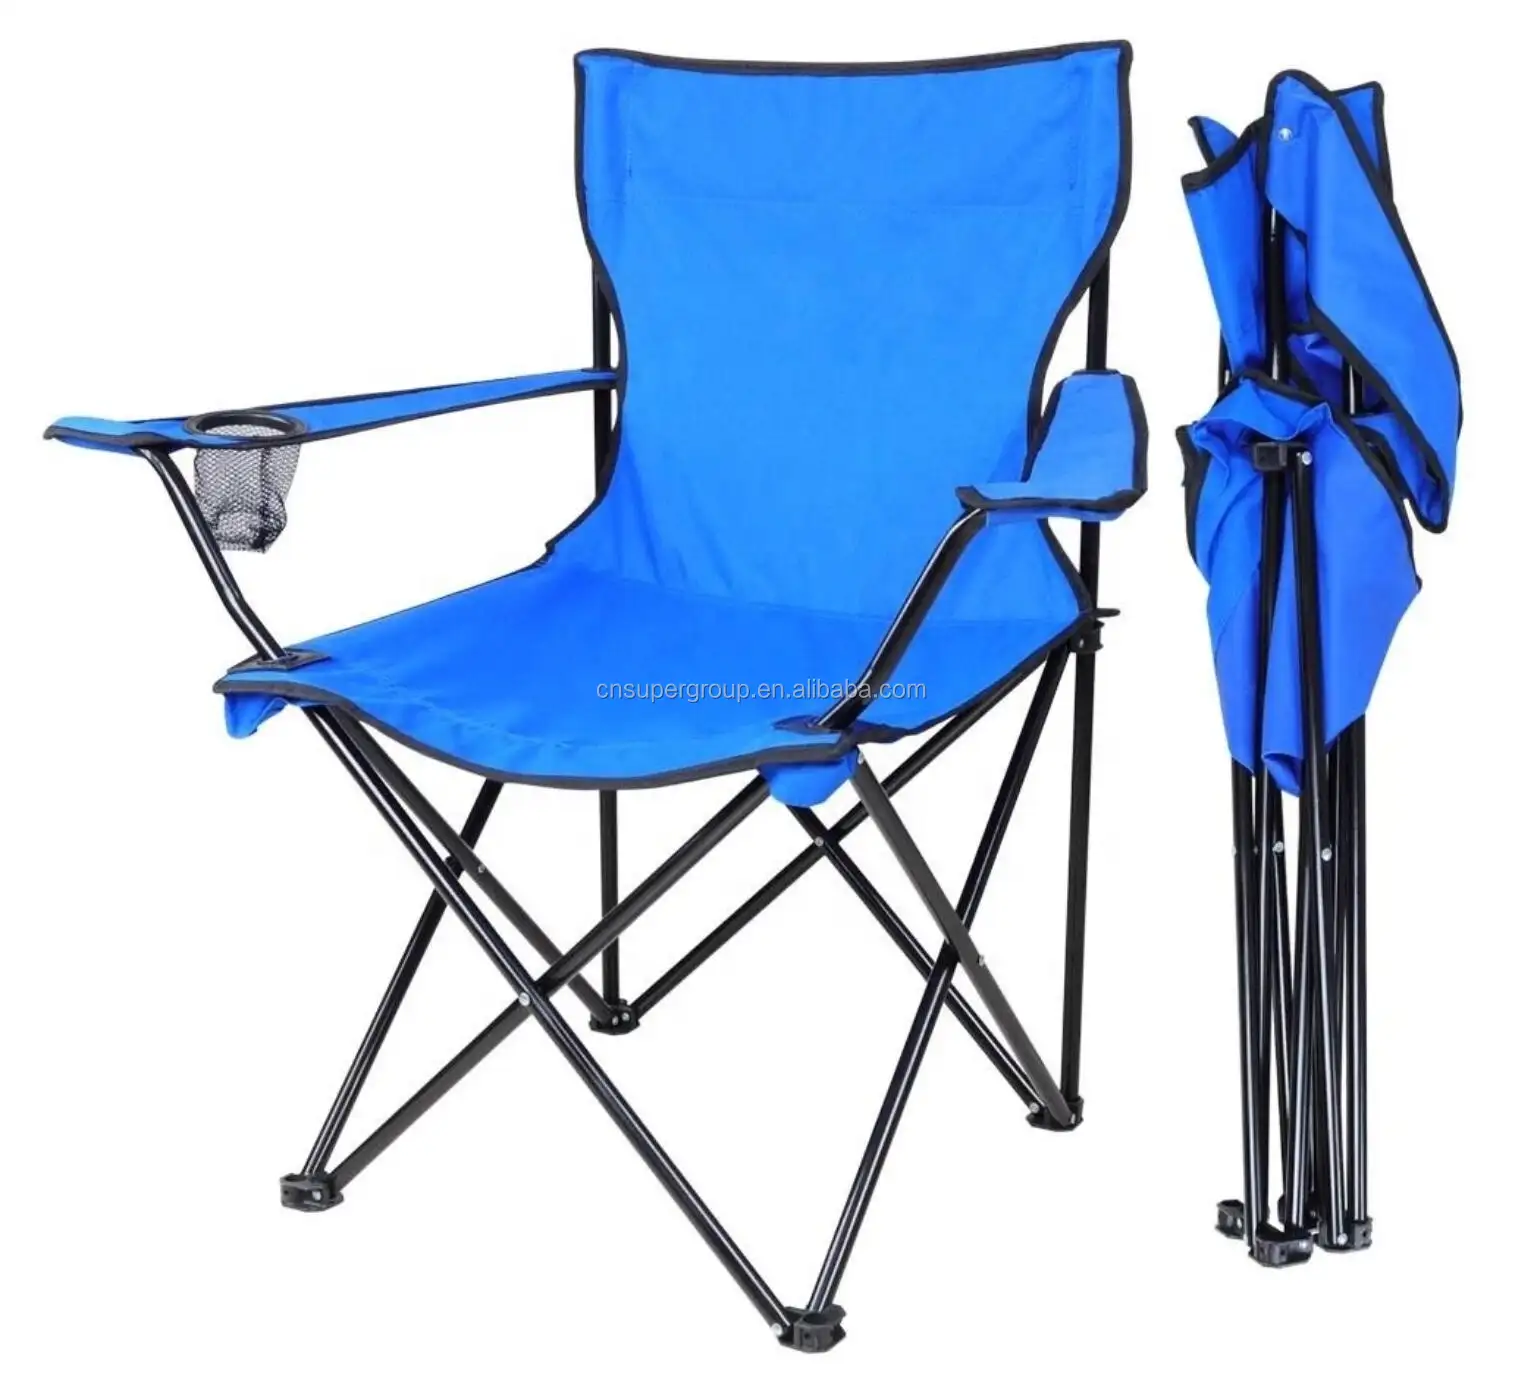 Canopy folding relax chair light weight camping portable beach chair with sunshade outdoor lounge chair